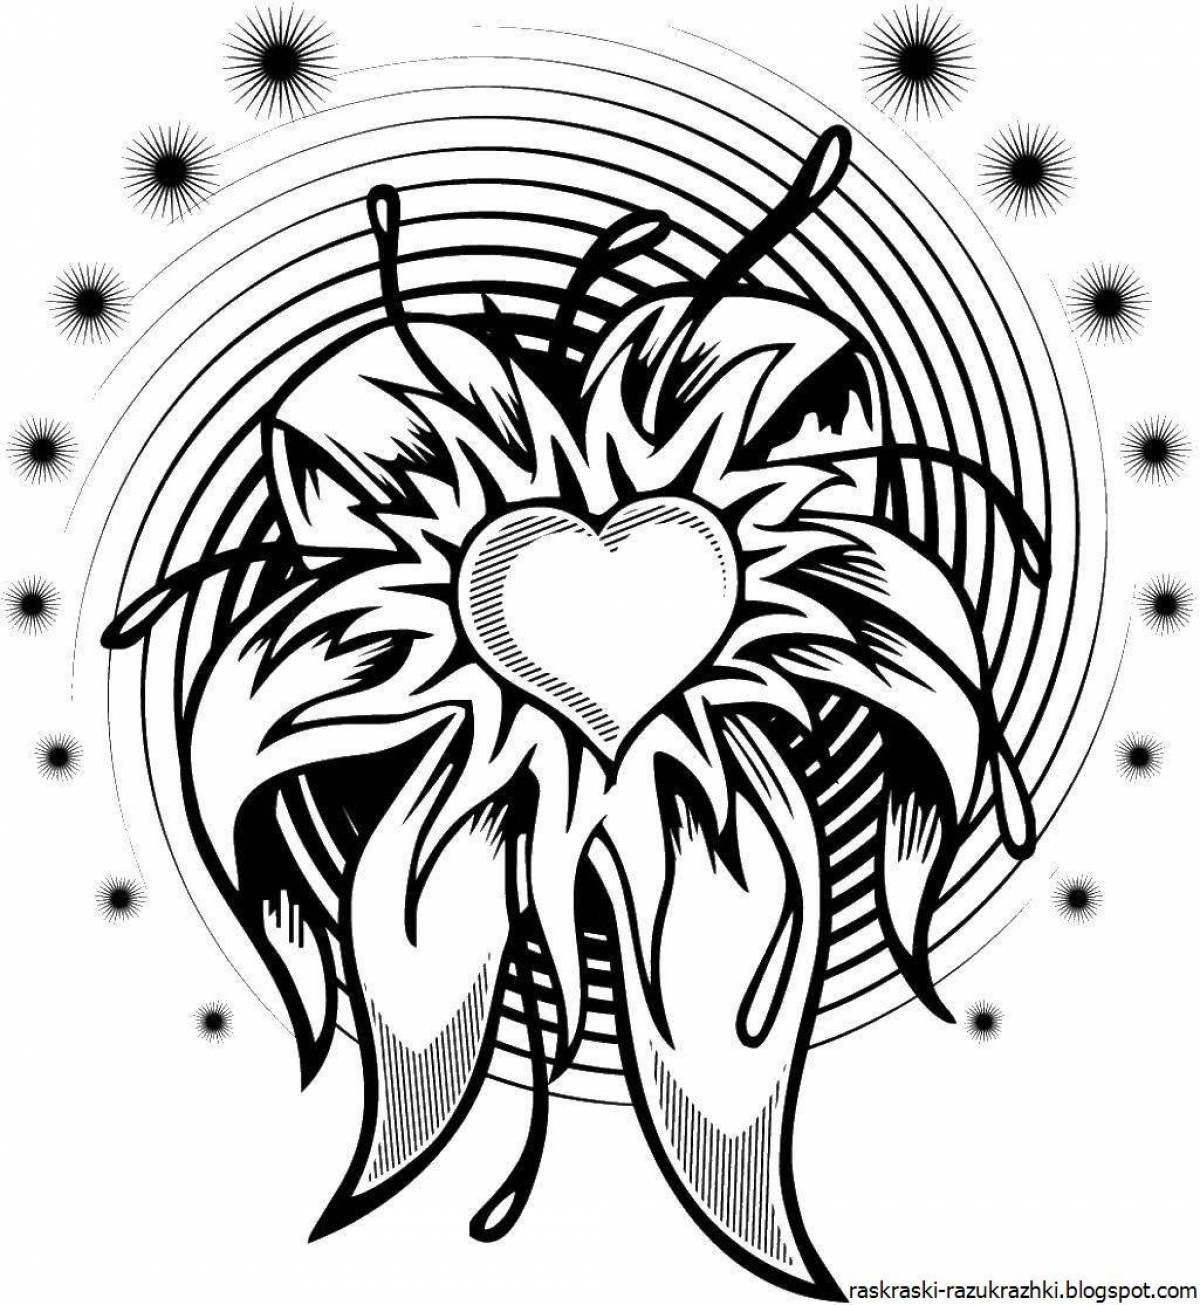 Intriguing tattoo coloring page